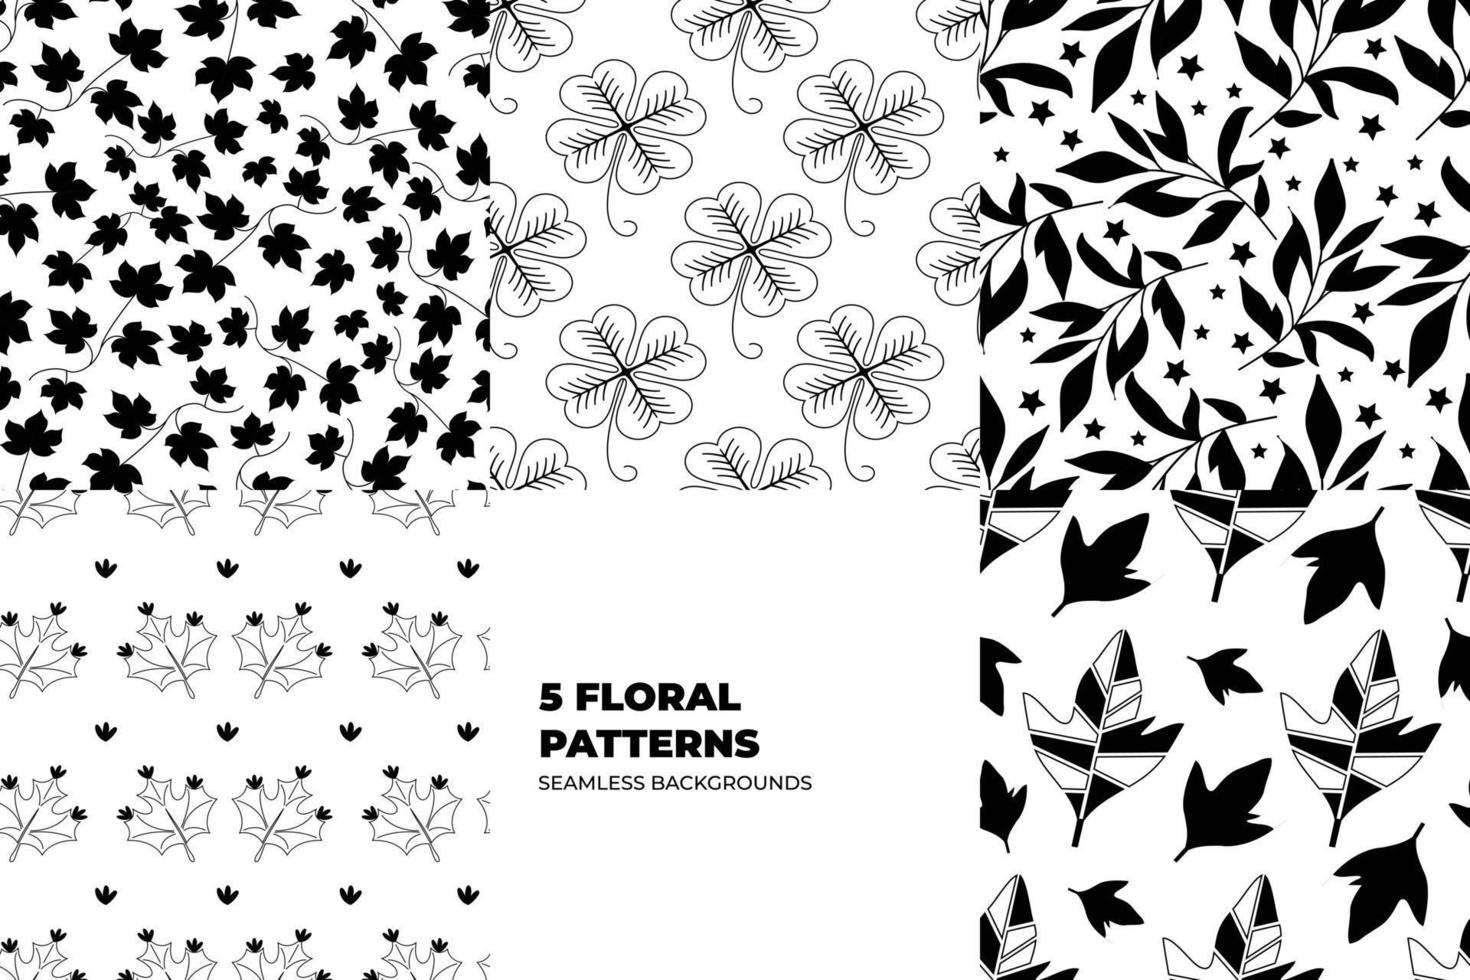 Botanical seamless patterns set. Leaves and flowers in black and white tones. Repeating vector design for paper, cover, fabric, interior decor and textile users. Vector illustration.